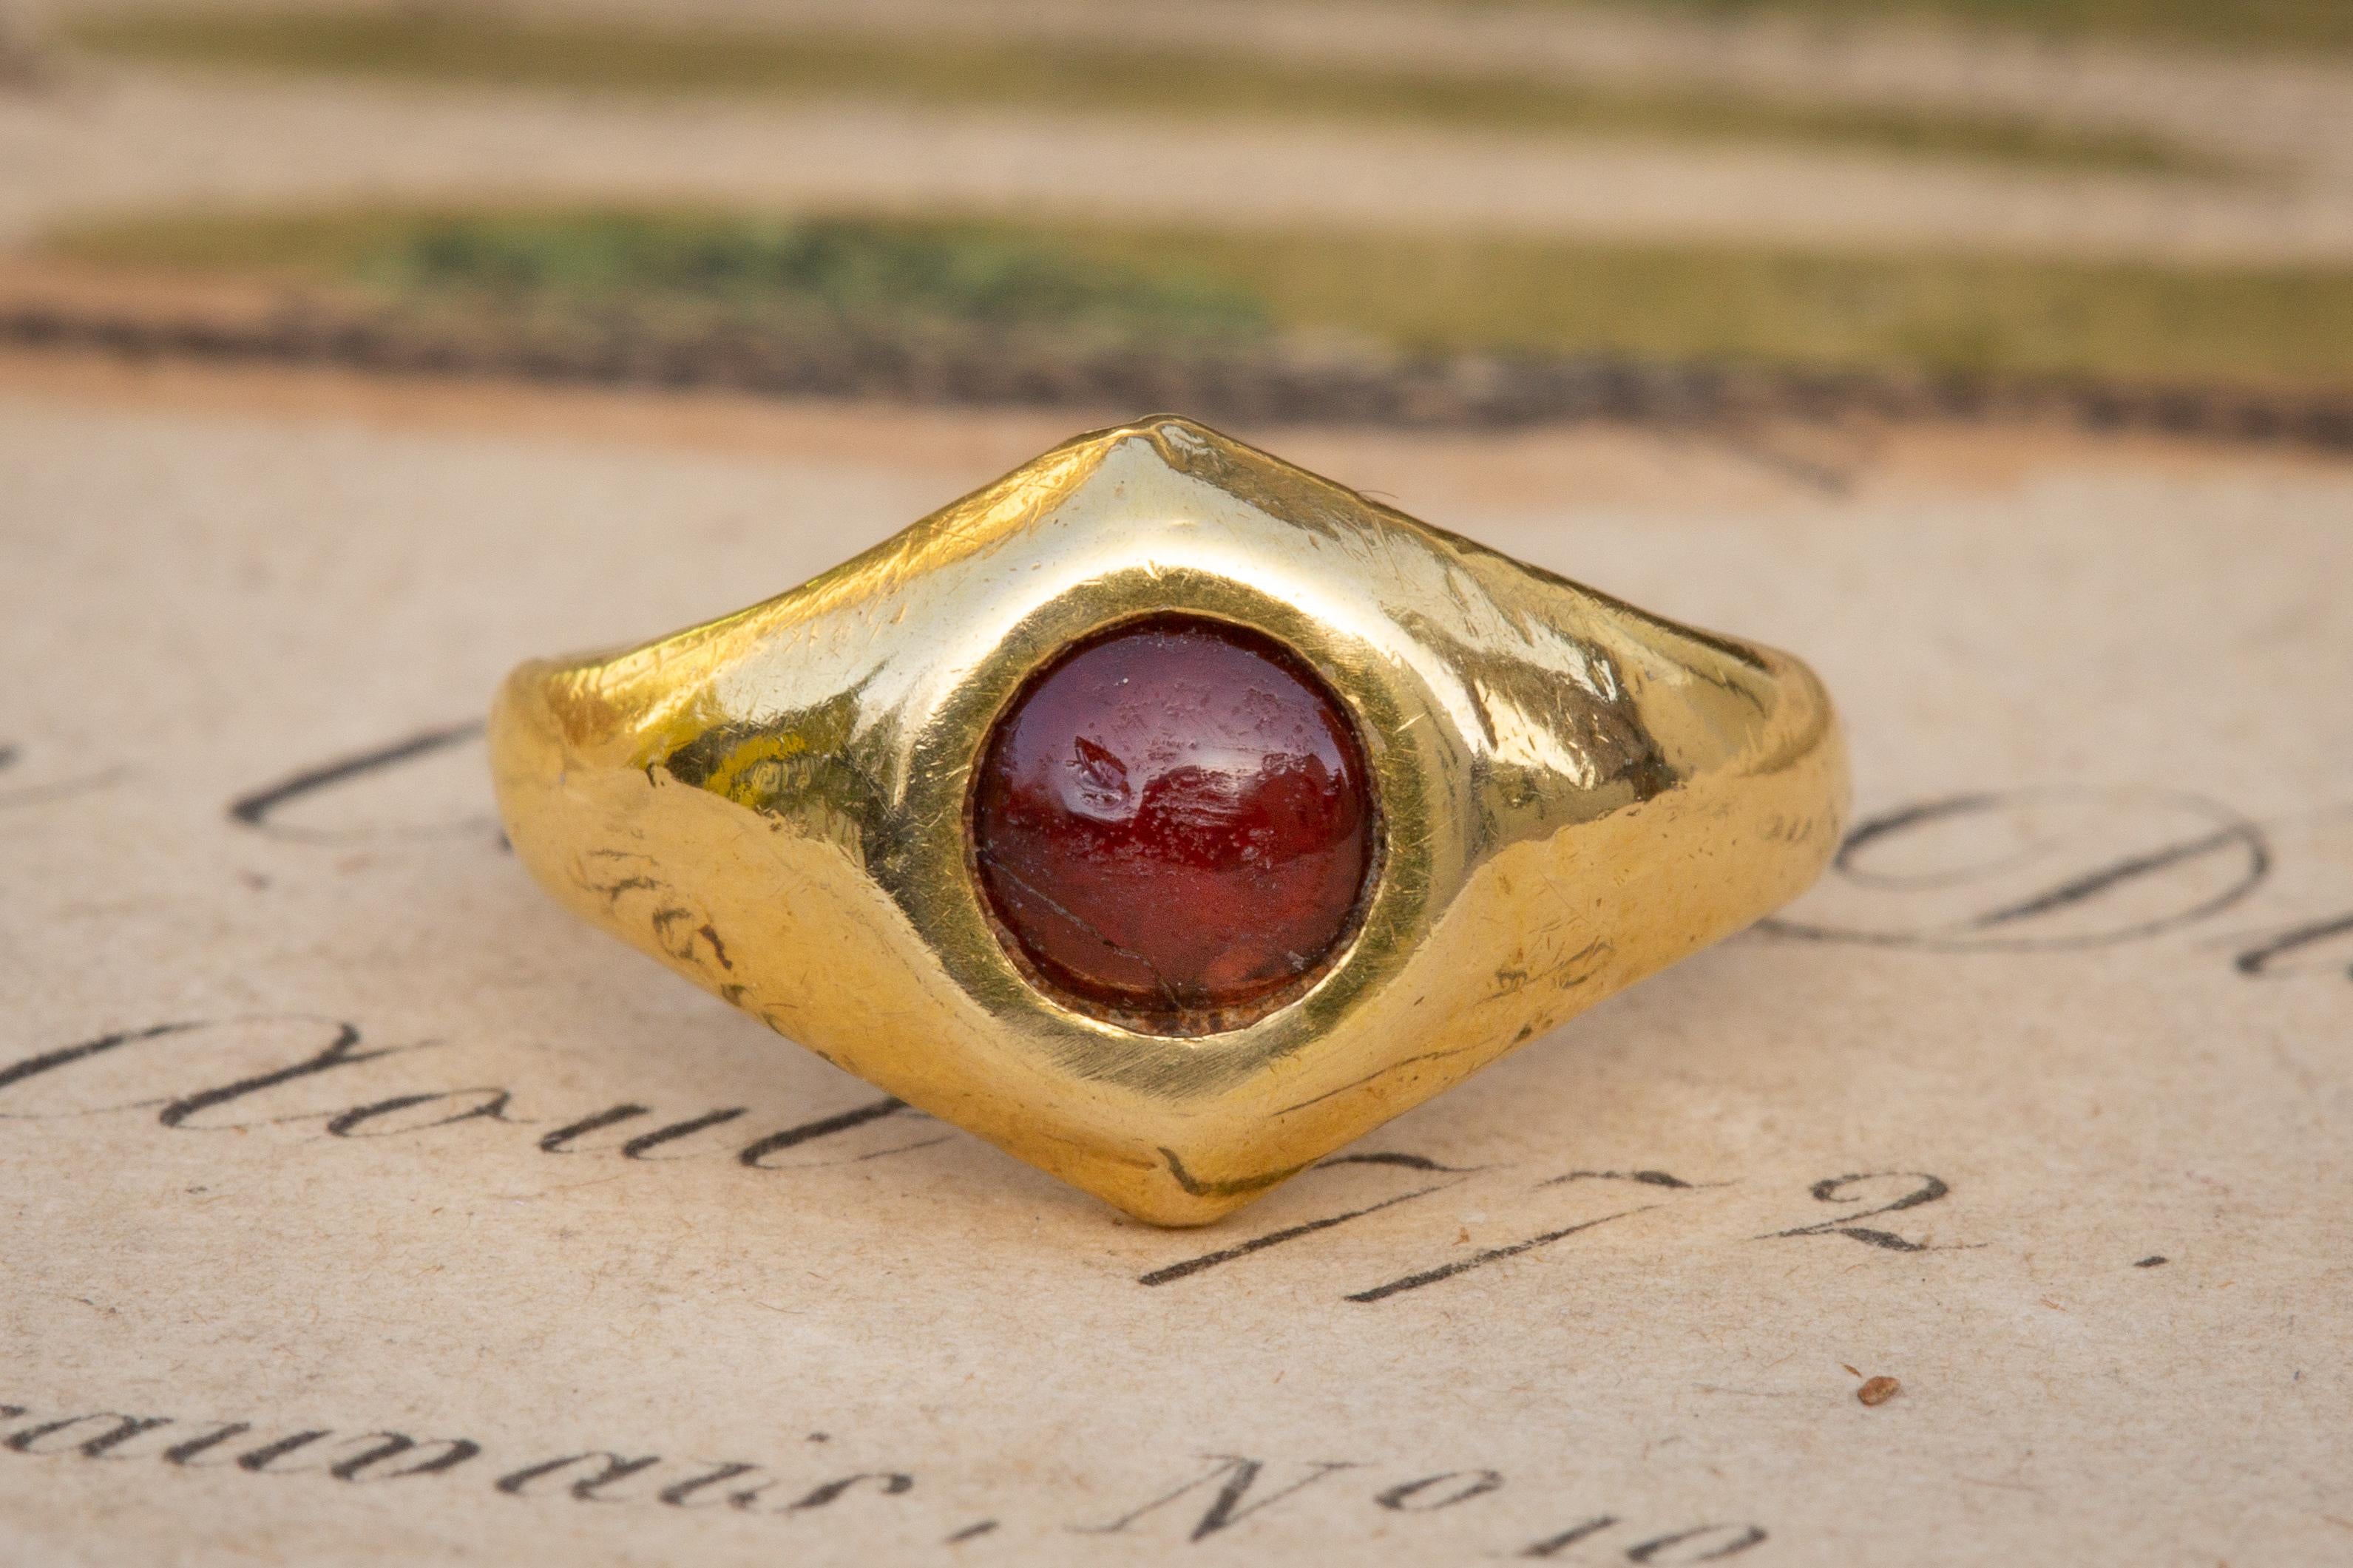 Women's Small Ancient Roman Period Gold Garnet Cabochon Ring Antique  For Sale